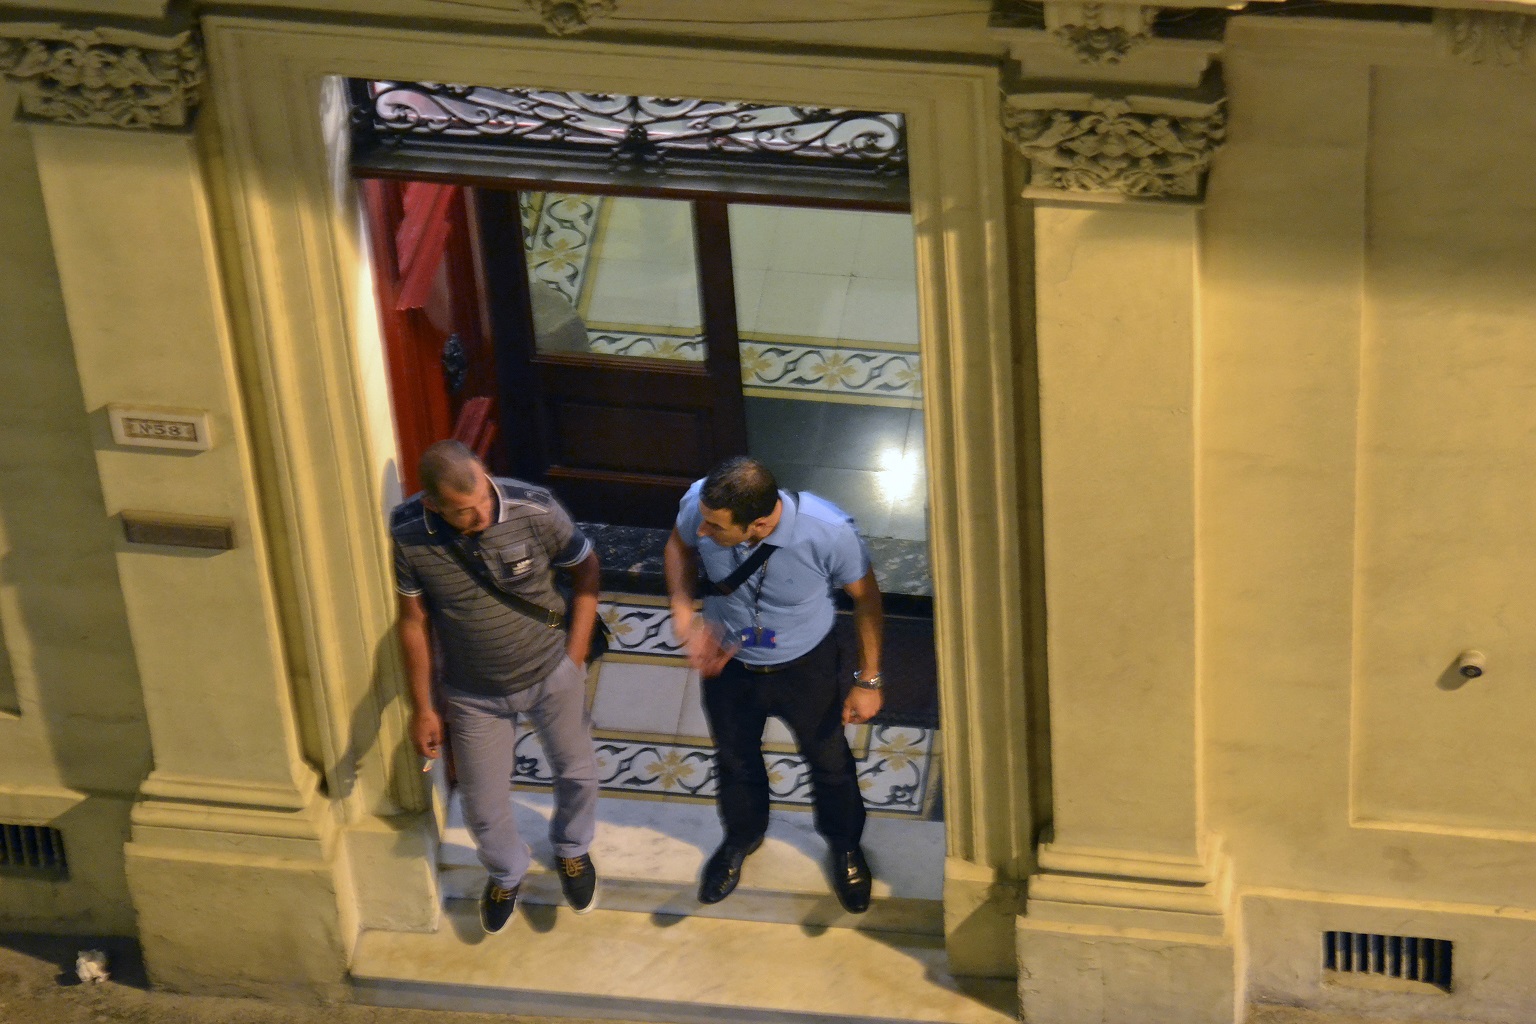 8.15pm - two police officers stand at the entrance to the building